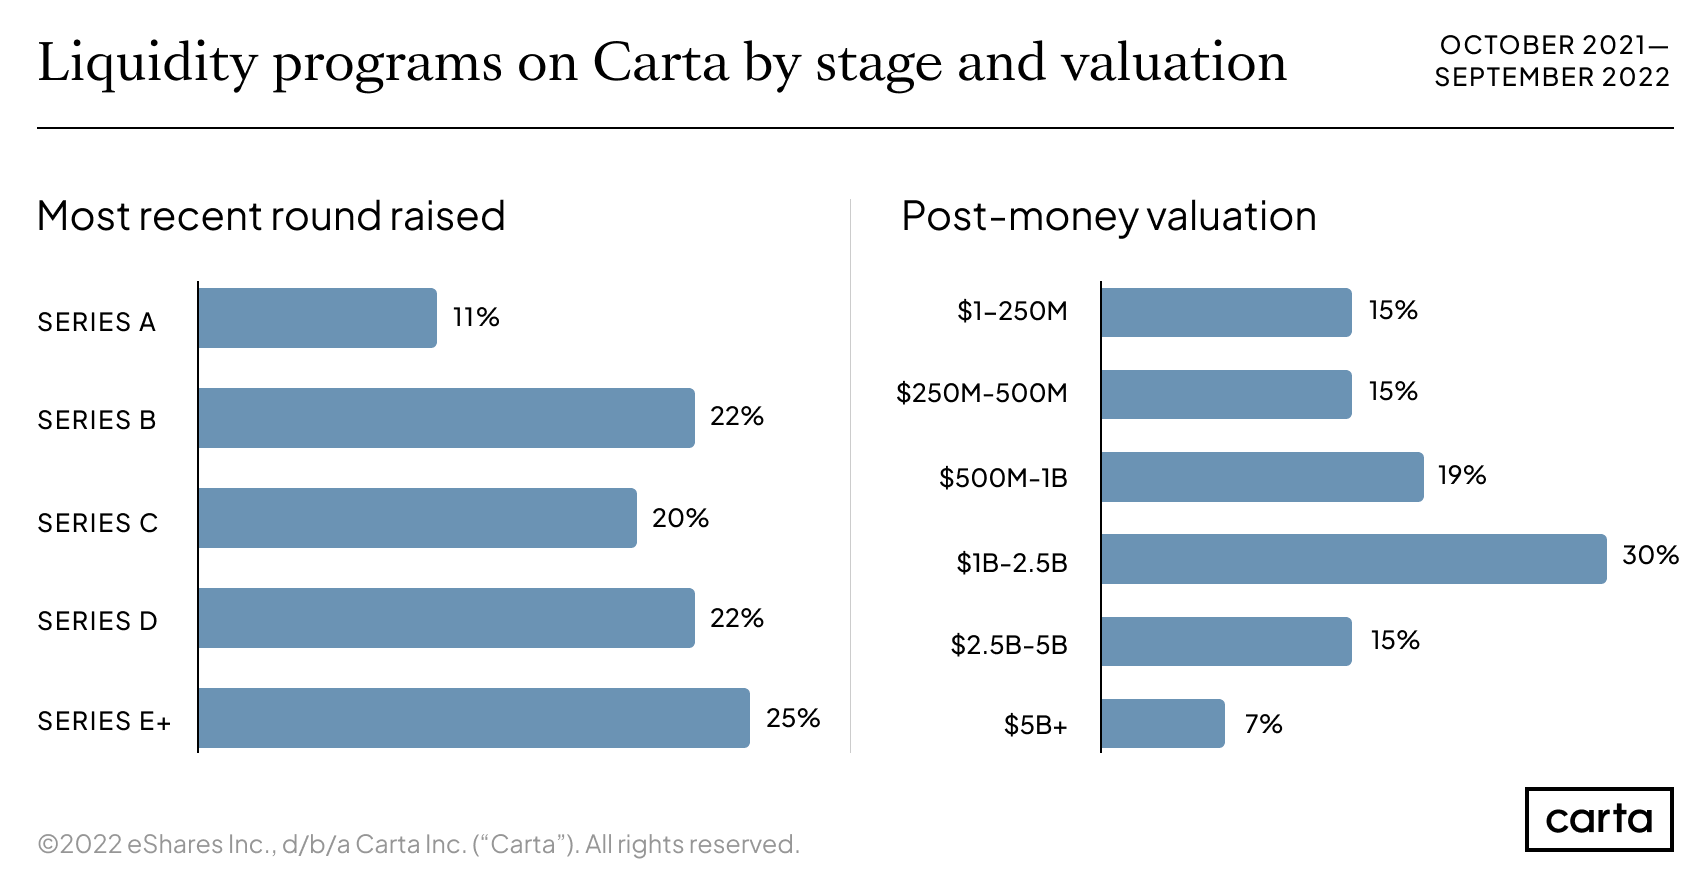 Most recent round raised and most recent post-money valuation for companies conducting liquidity programs on Carta from October 2021 to September 2022